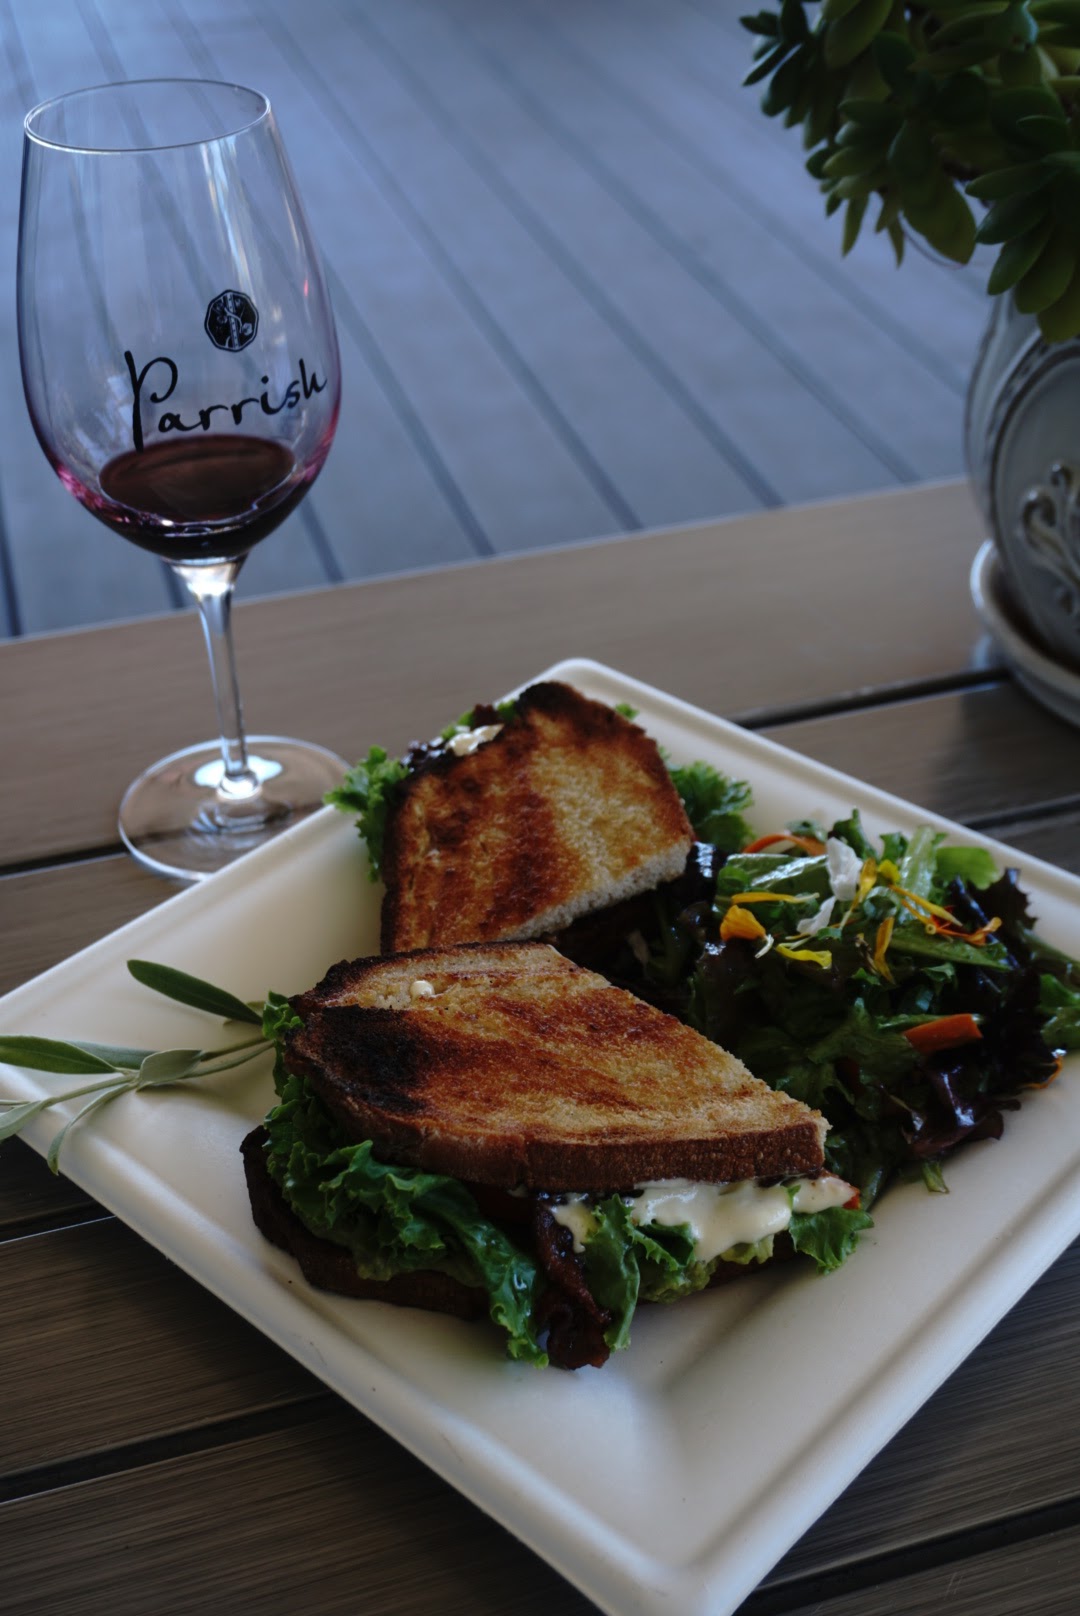 A plate of food with a glass of Parrish wine in Paso Robles Wineries